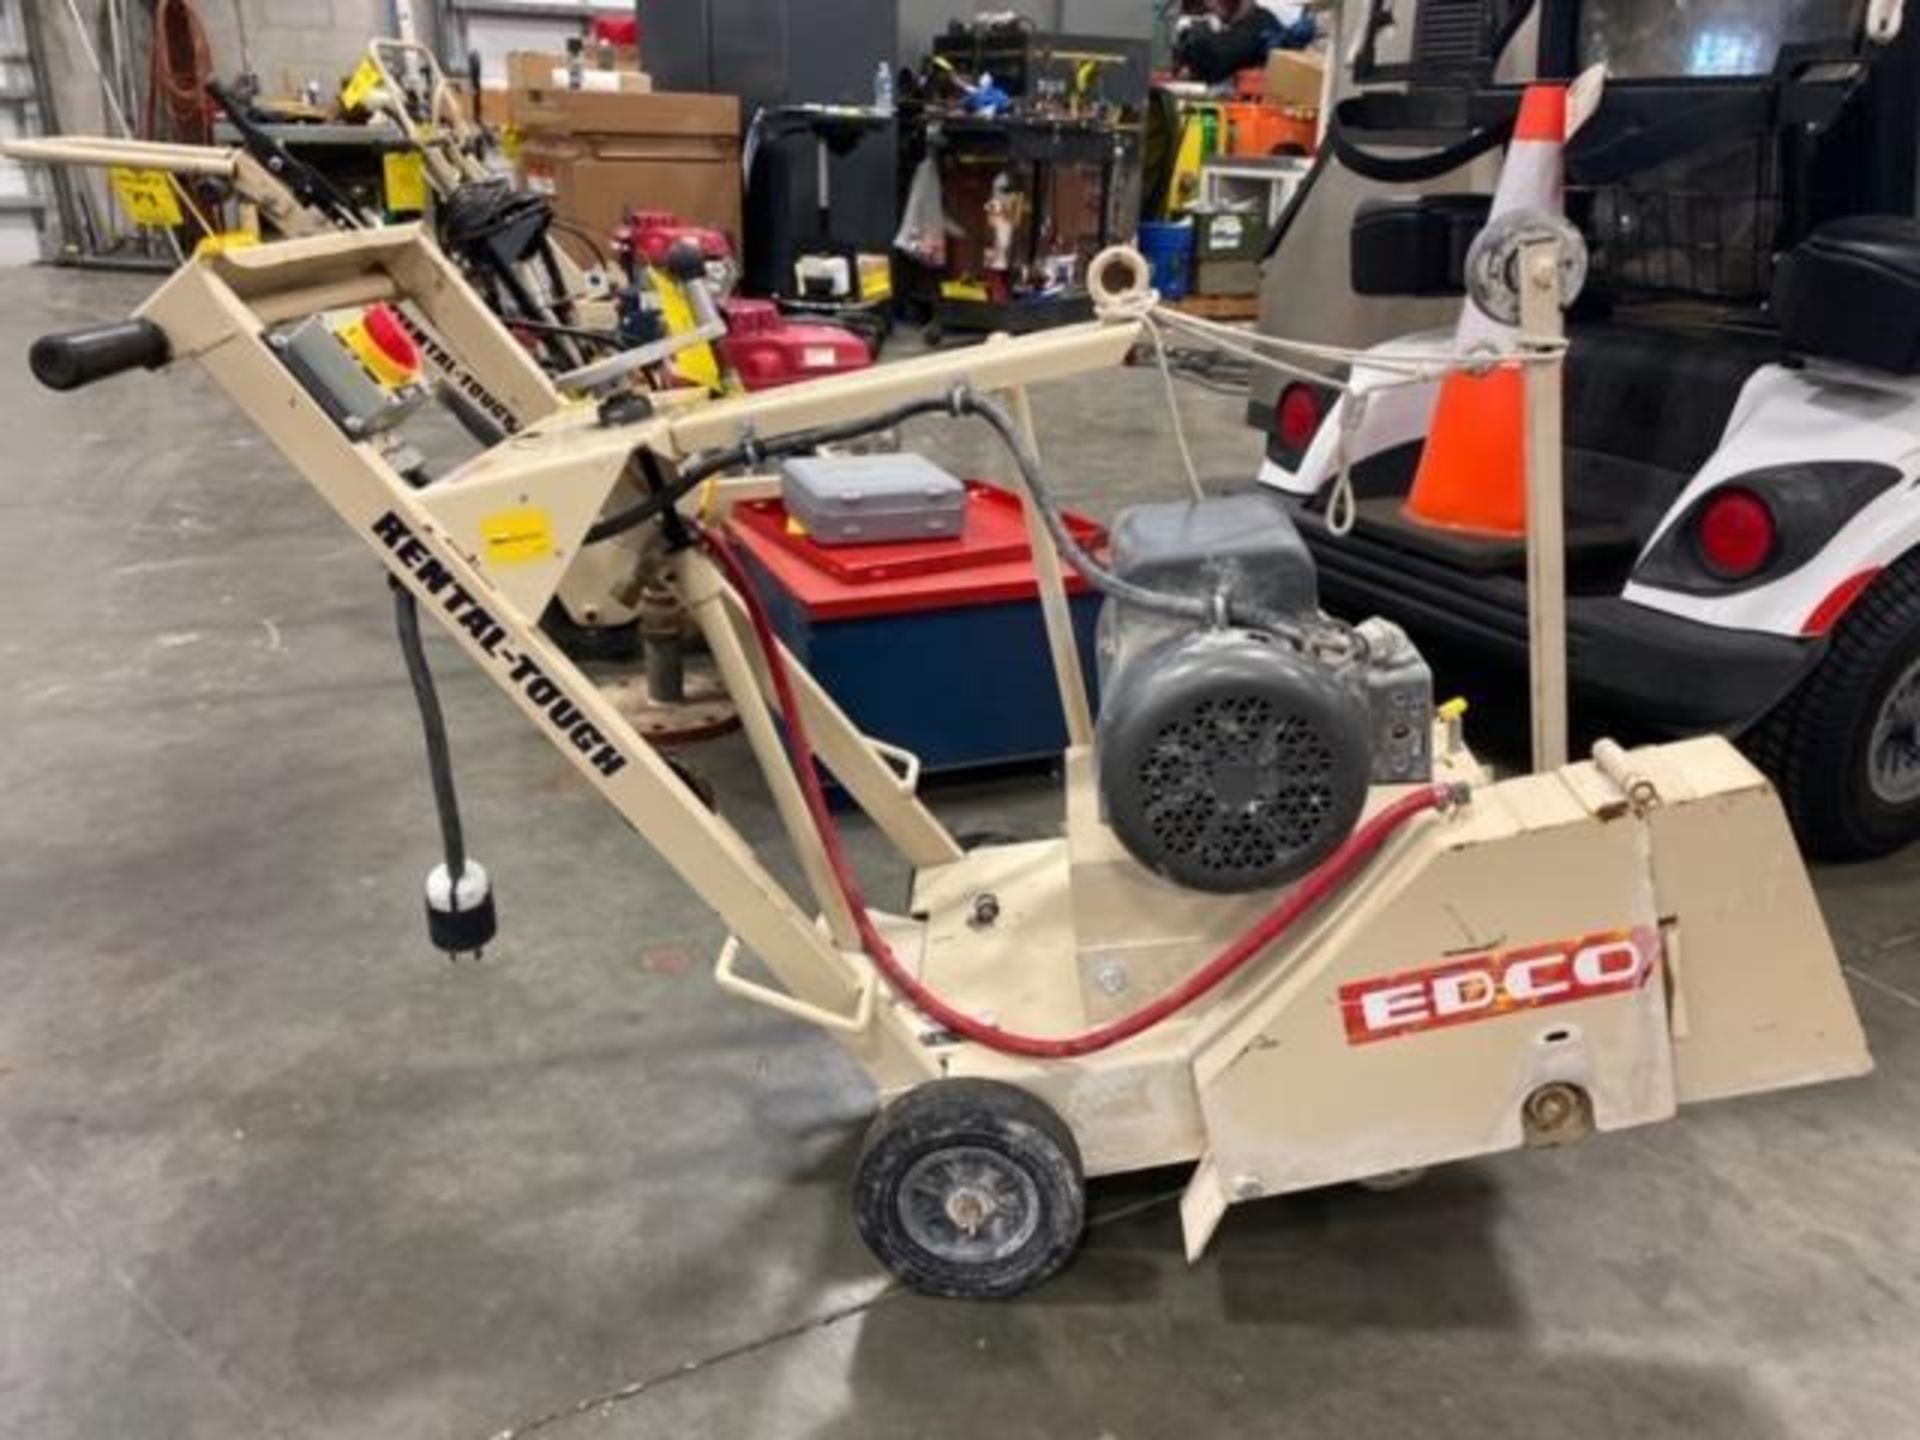 2017 EDCO DS-18-5 WALKBEHIND SAW SUPPORT EQUIPMENT - Image 2 of 20